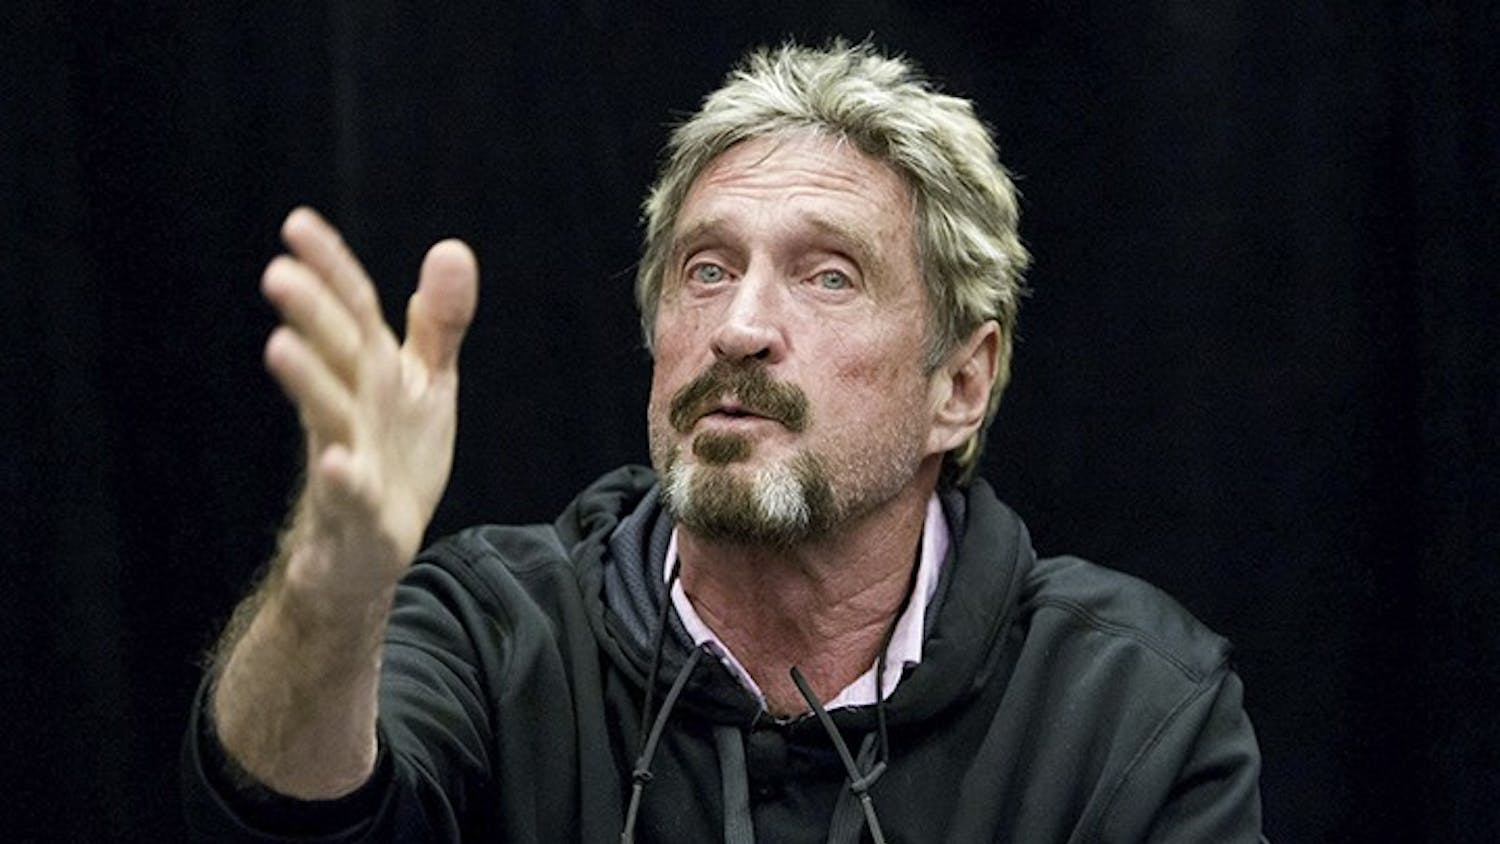 John McAfee speaks during the C2SV Technology Conference + Music Festival at the McEnery Convention Center in San Jose, California, on September 28, 2013. (LiPo Ching/Bay Area News Group/MCT)